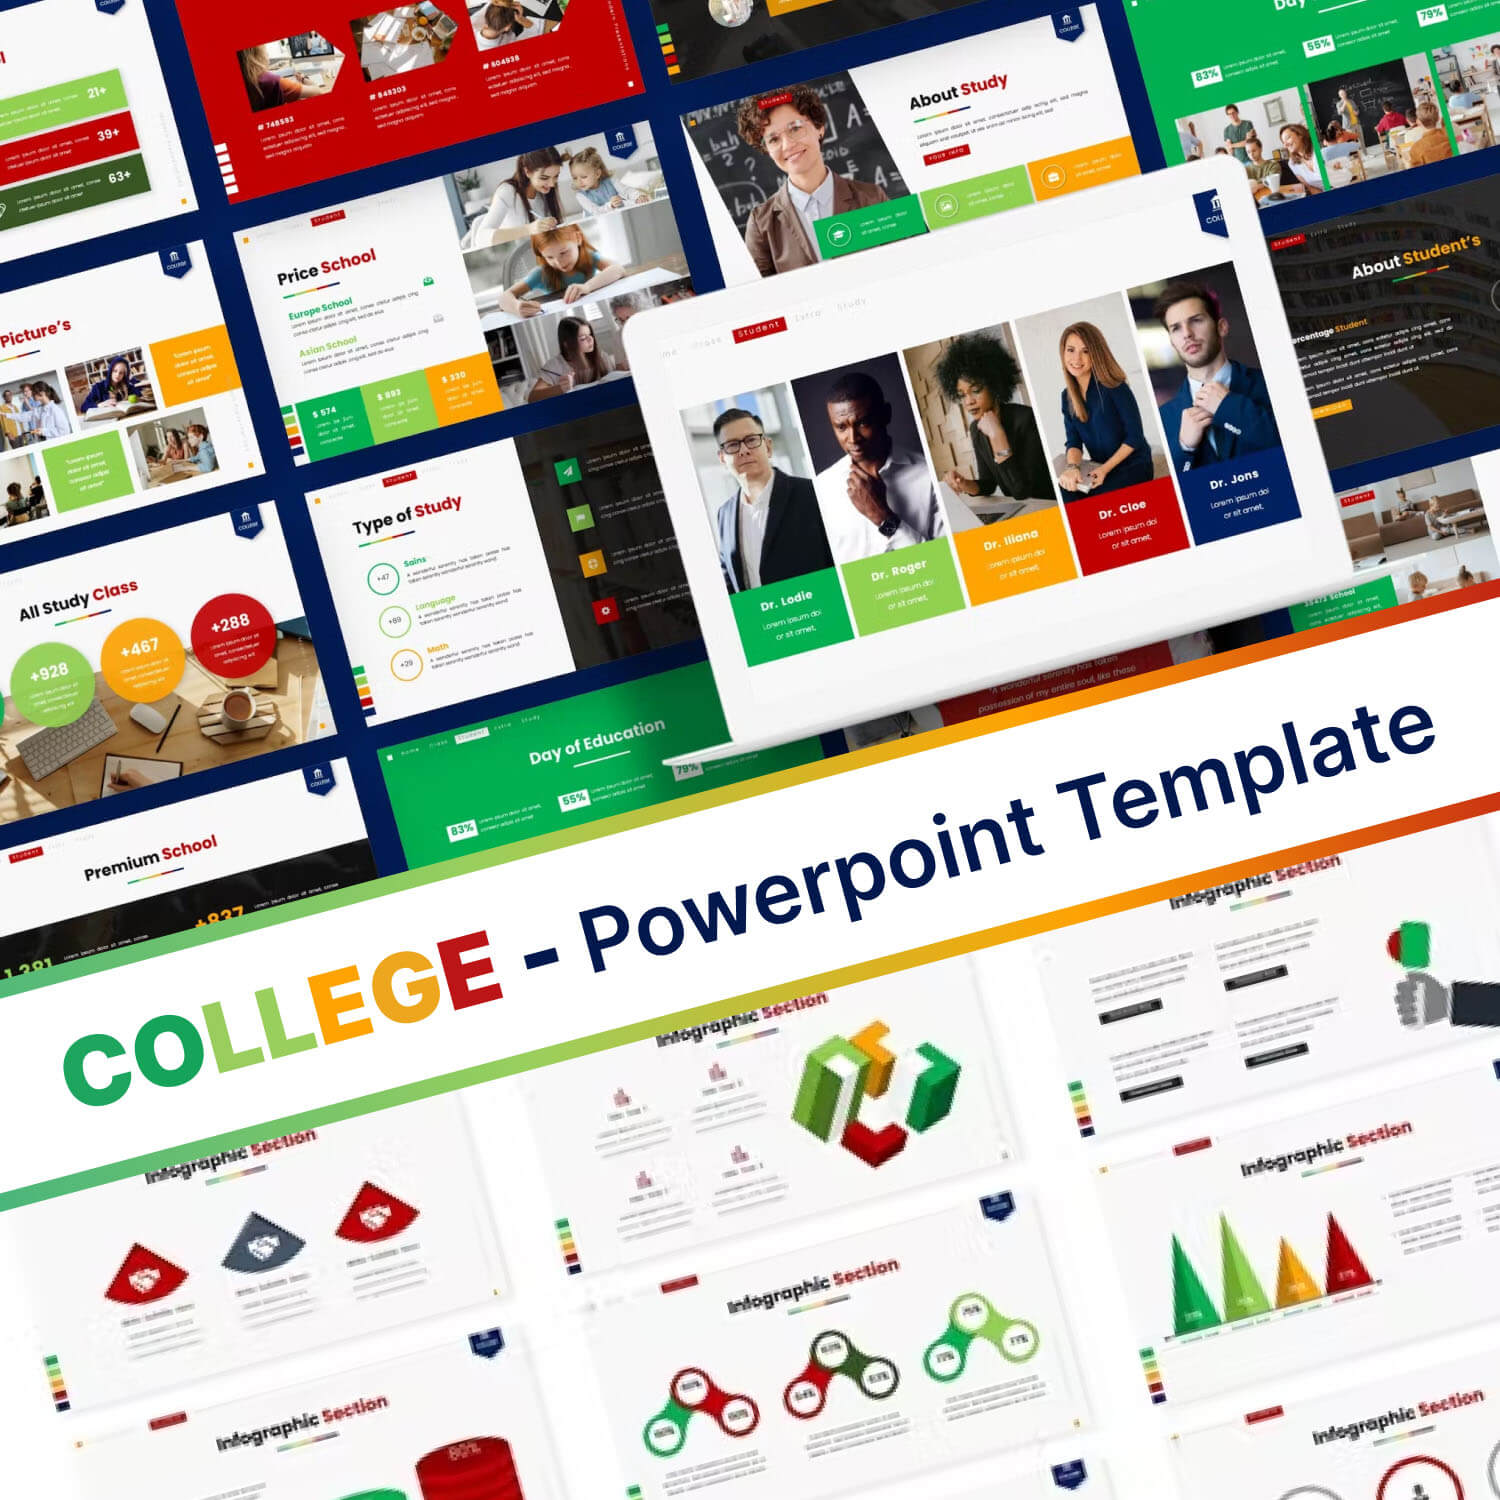 College - Powerpoint Template.